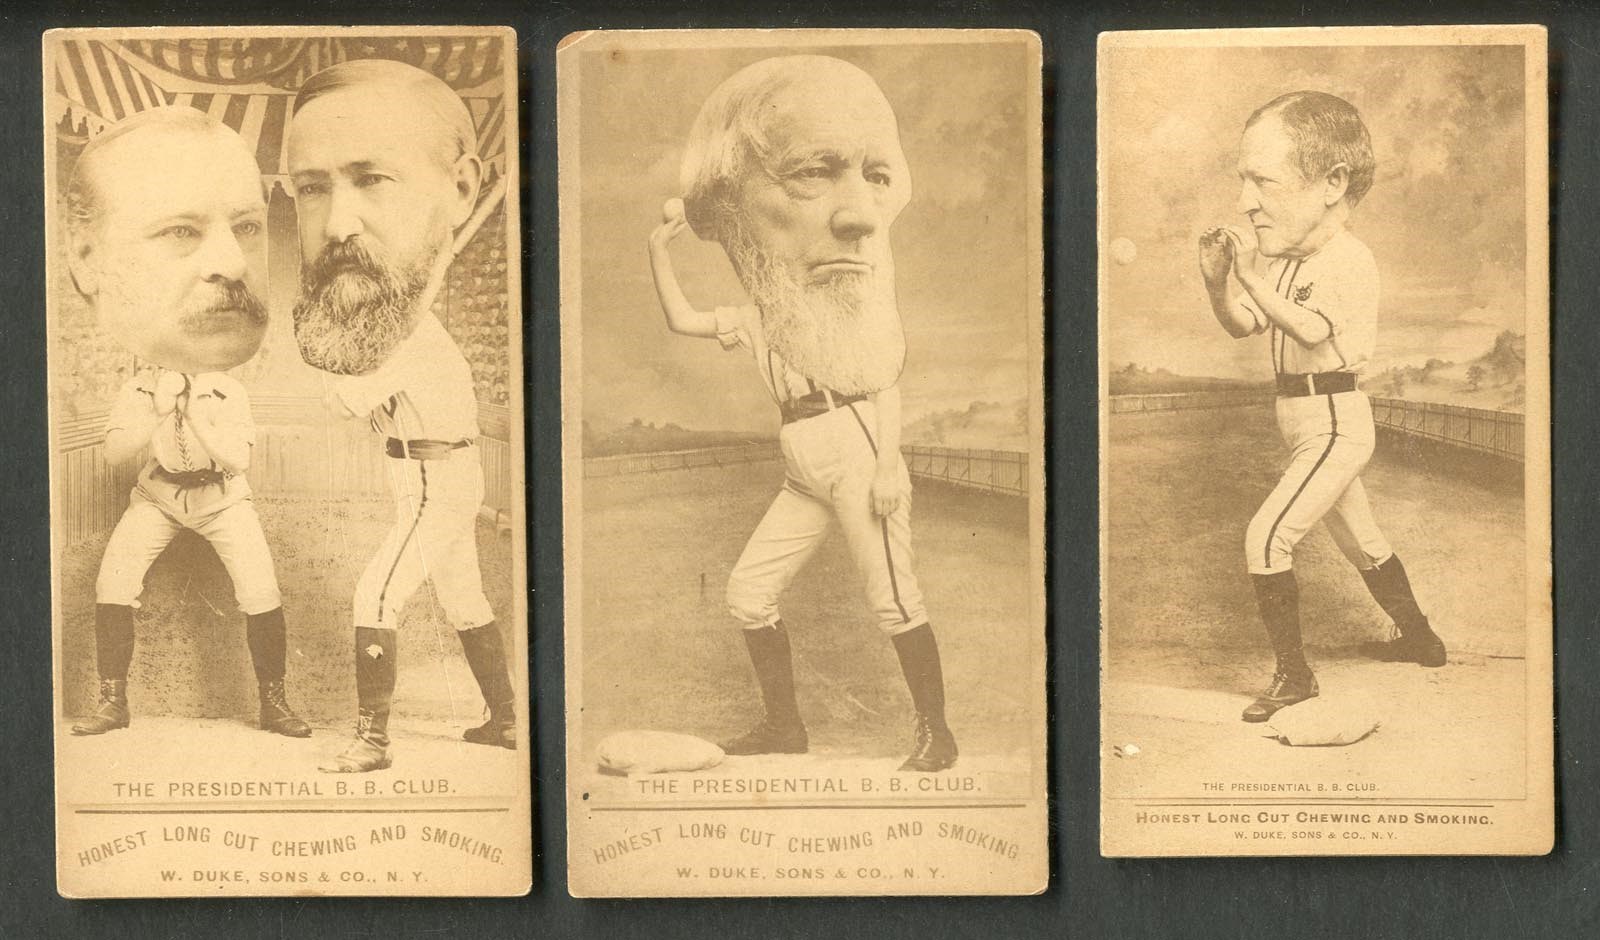 Sports and Non Sports Cards - N154 Honest Long Cut Presidential B.B. Club Card Collection (3)